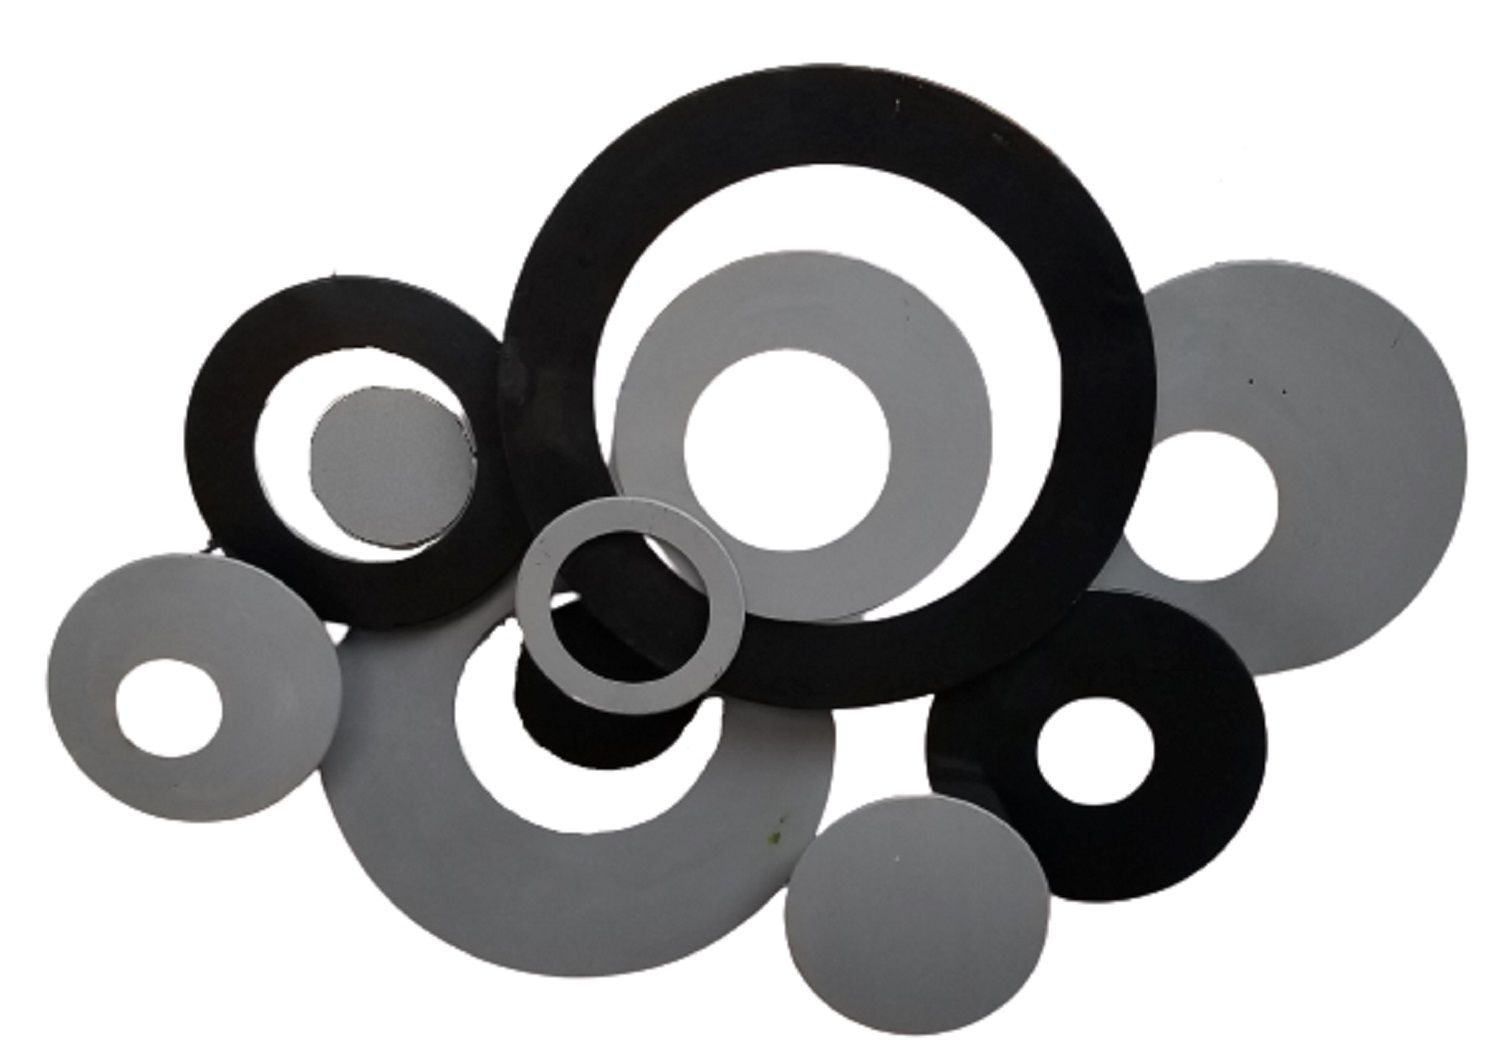 Metal Wall Art – Charcoal Linked Circle Disc Abstract Within Gray Metal Wall Art (View 8 of 15)